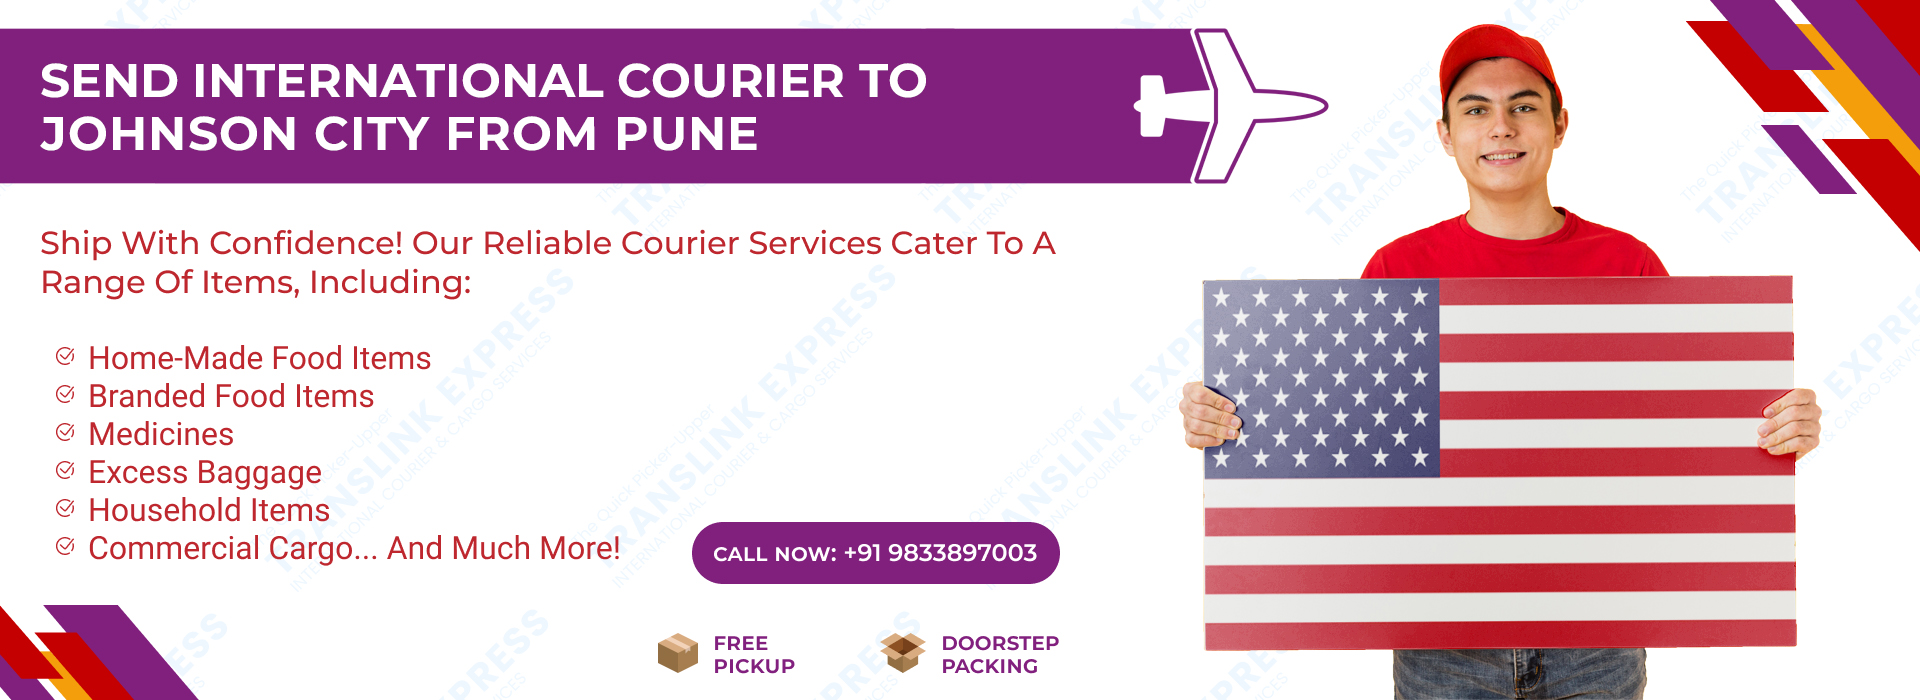 Courier to Johnson City From Pune